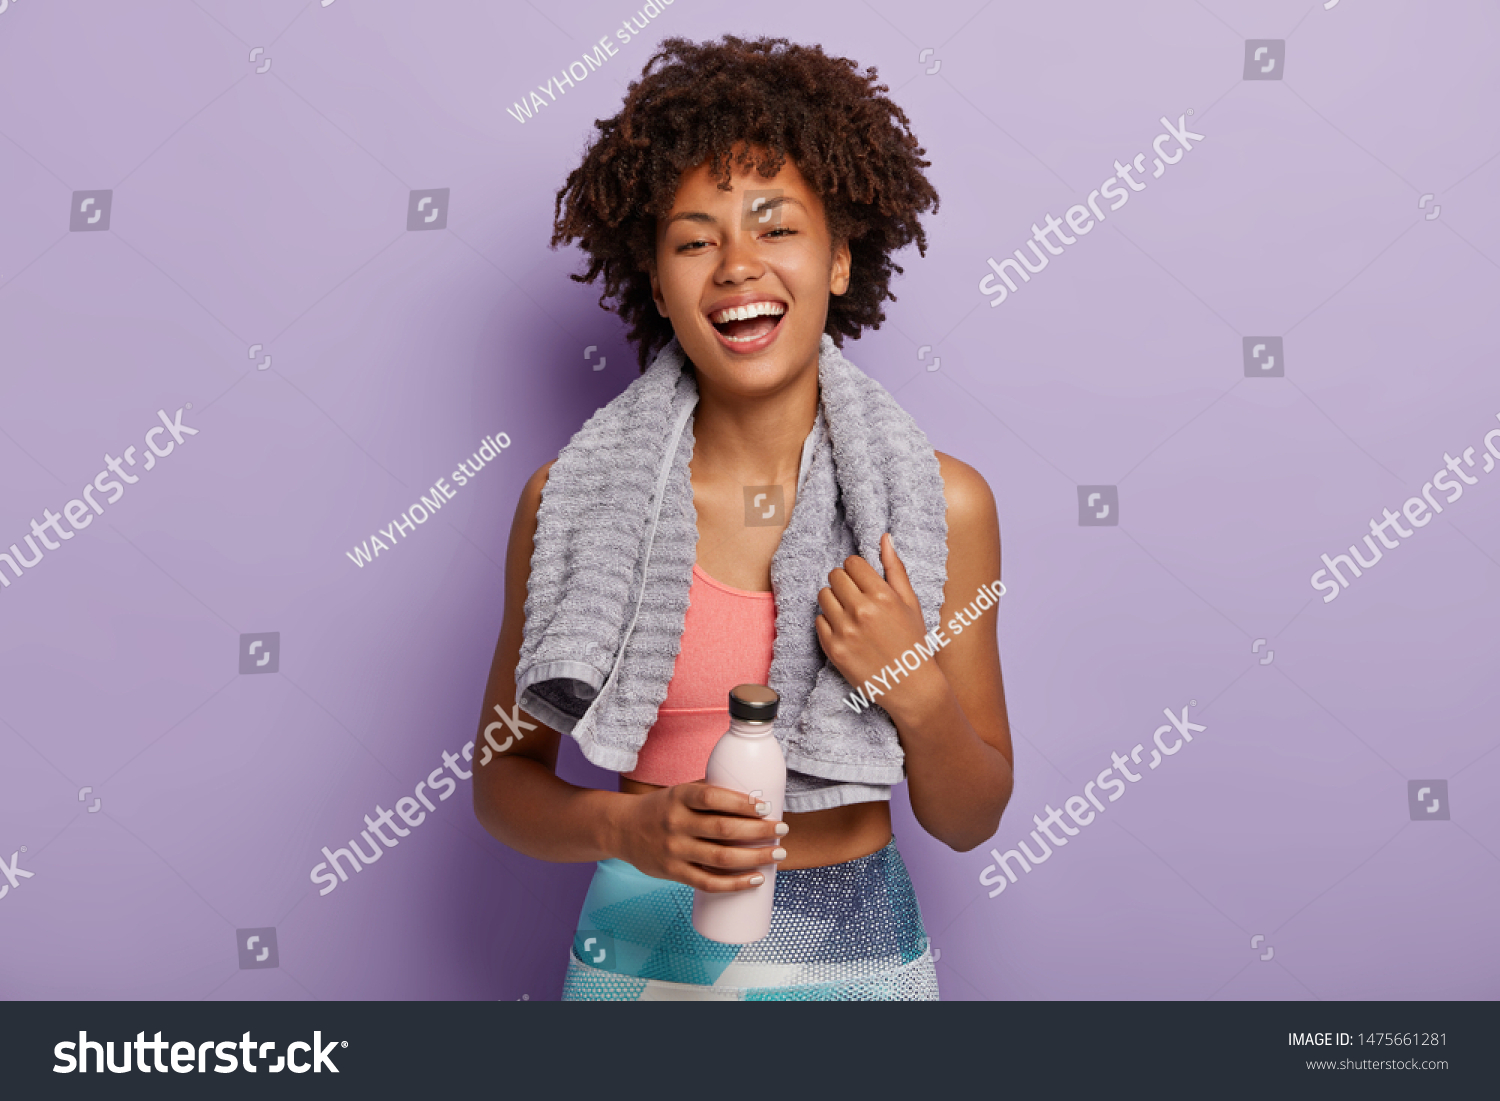 Smiling fitness woman in top and leggings takes break after training, holds bottle of water, wipes sweat with towel, being energetic runner or jogger, feels thirsty. People, wellness, vitality concept #1475661281